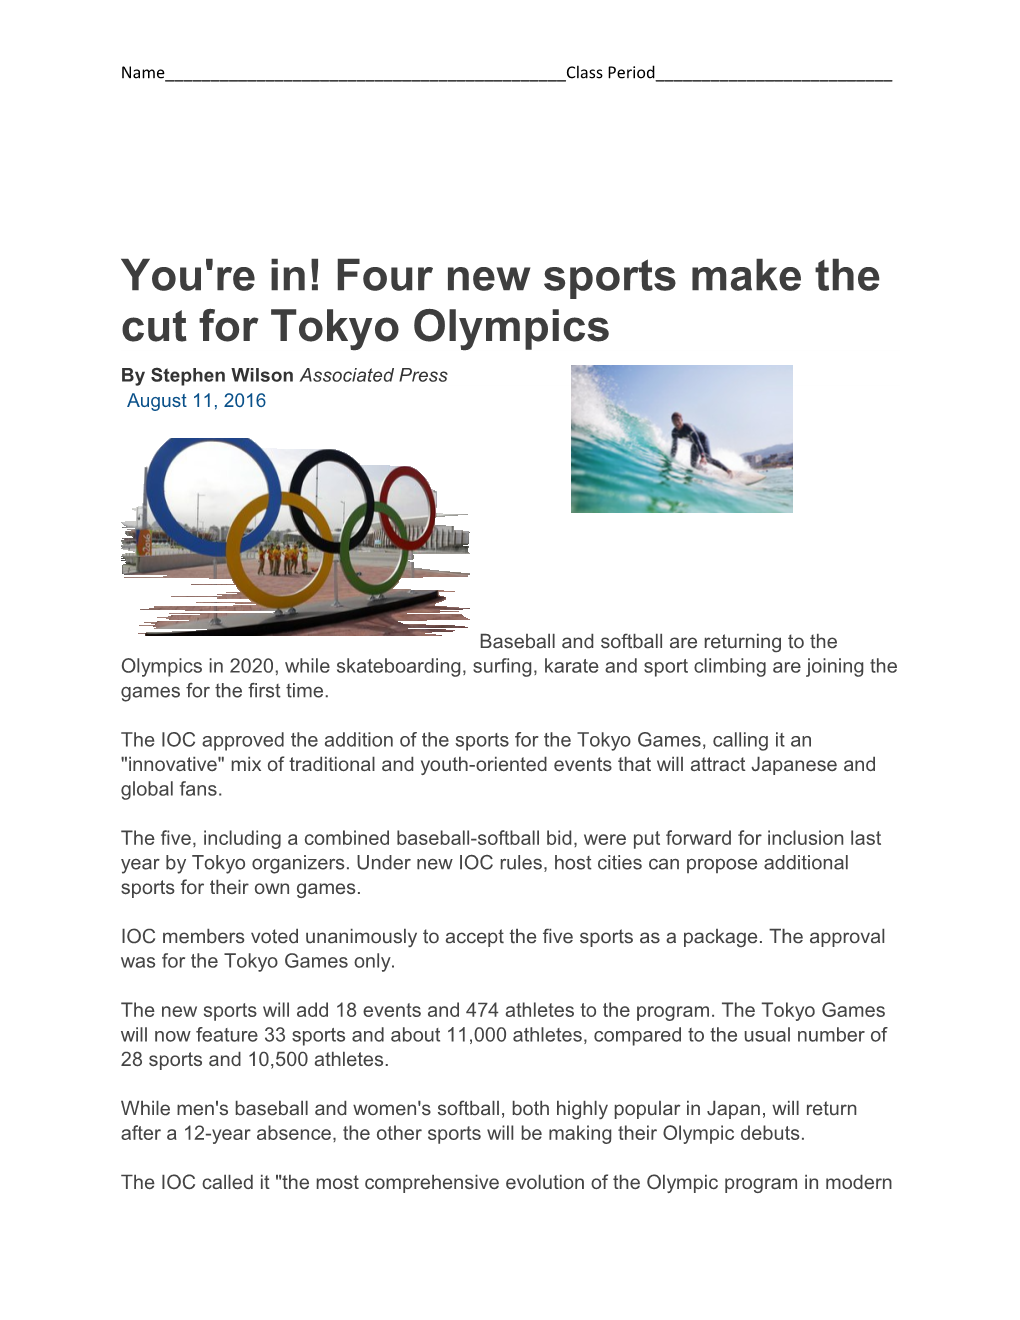 You're In! Four New Sports Make the Cut for Tokyo Olympics